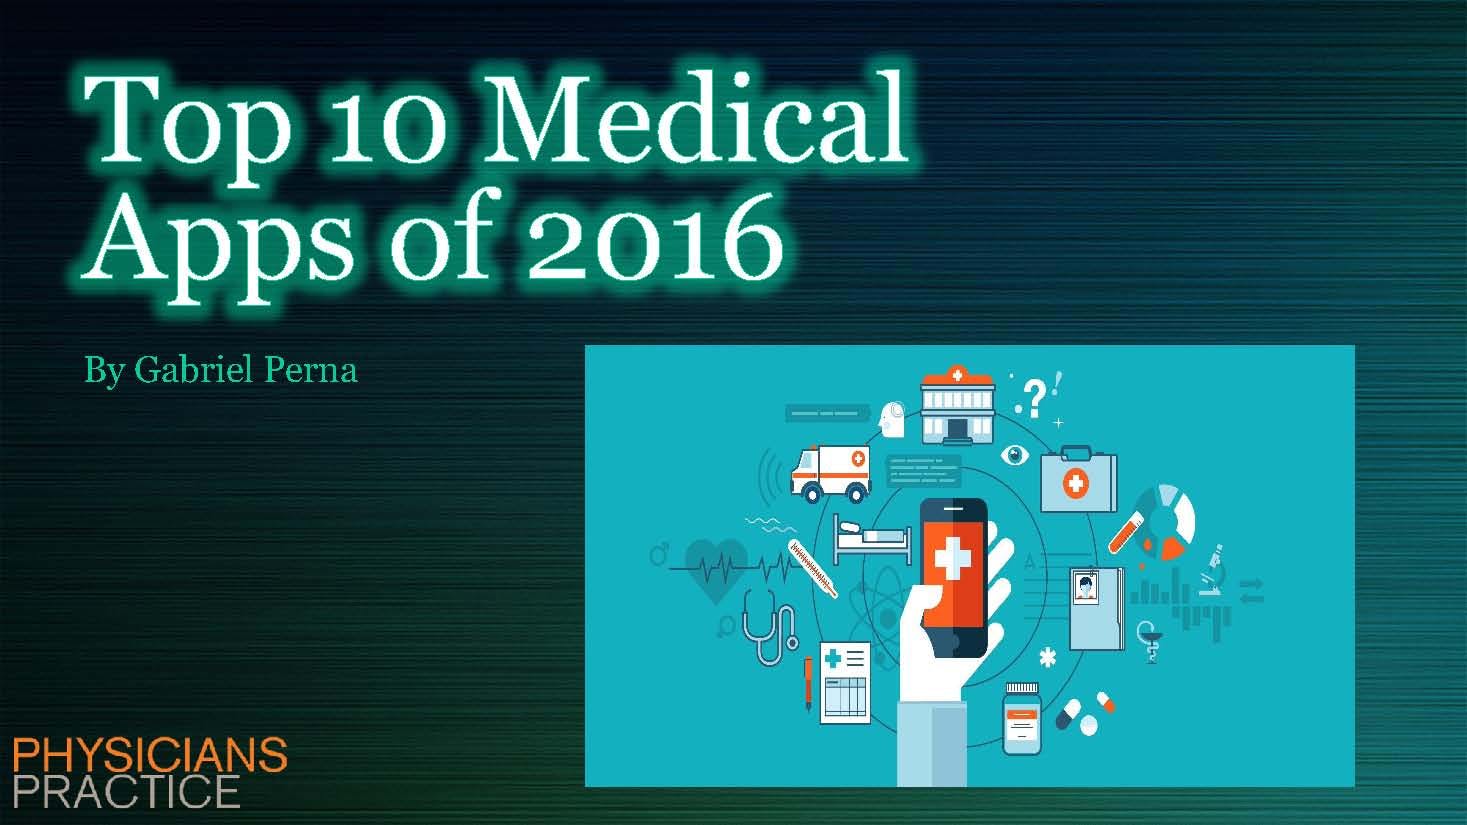 Top 10 Medical Apps of 2016